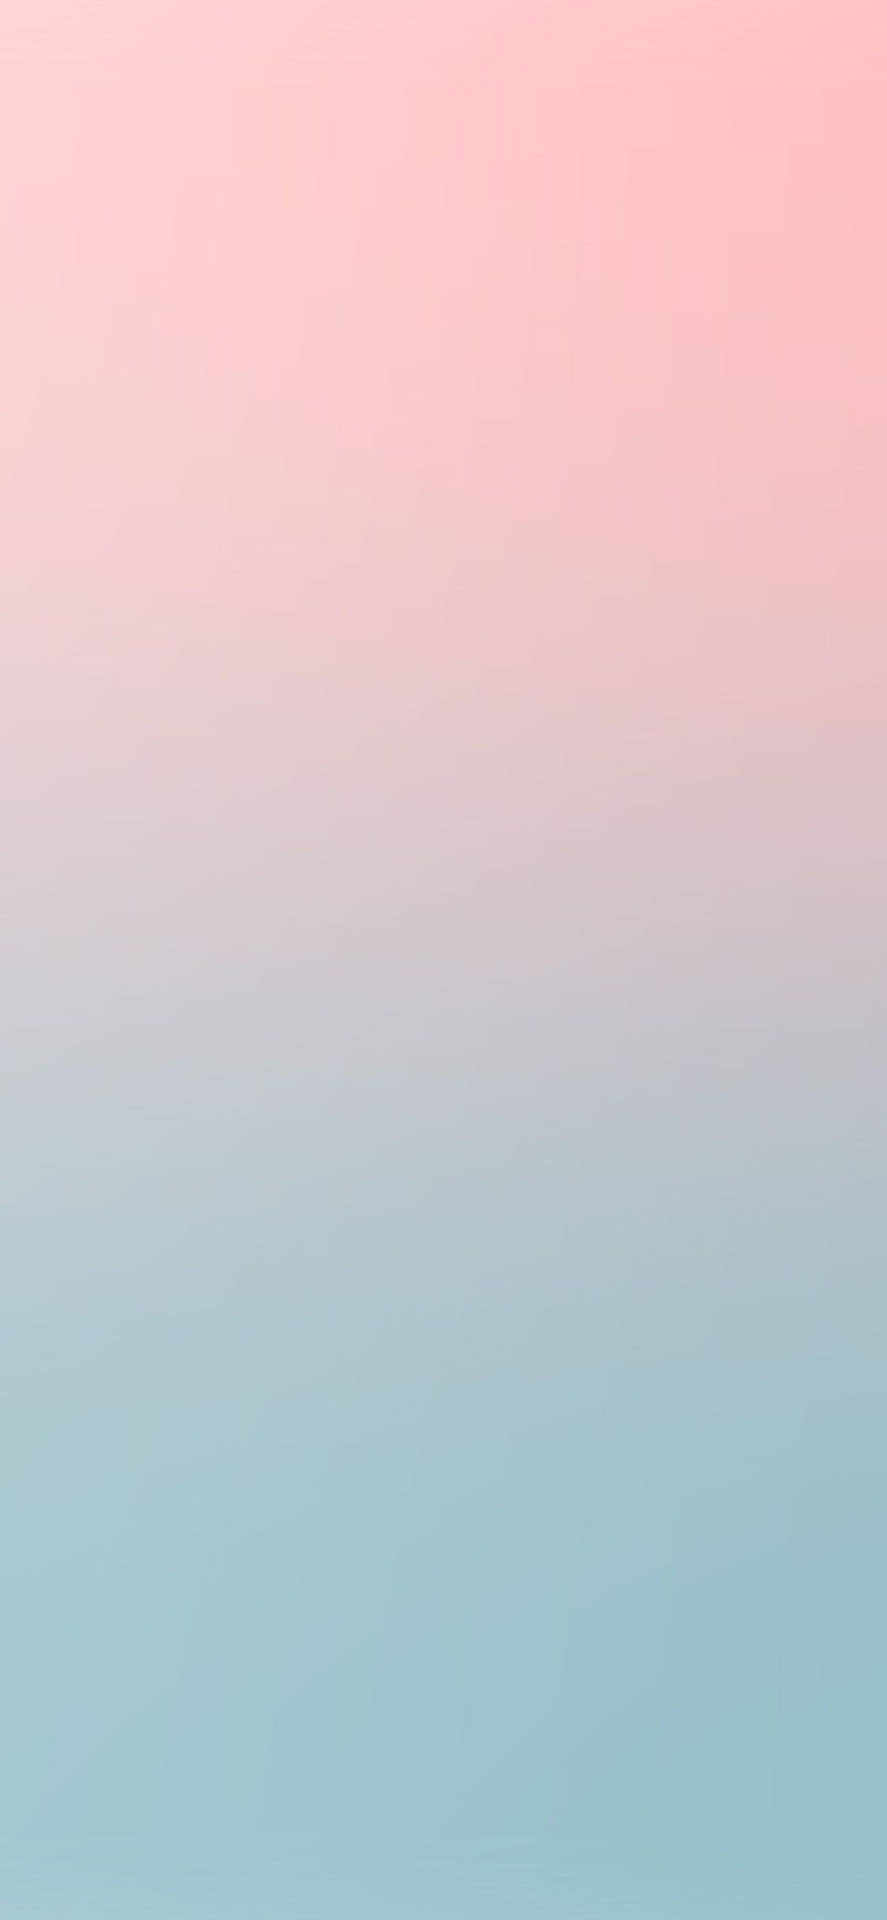 A dreamy pastel pink iPhone awaits you Wallpaper